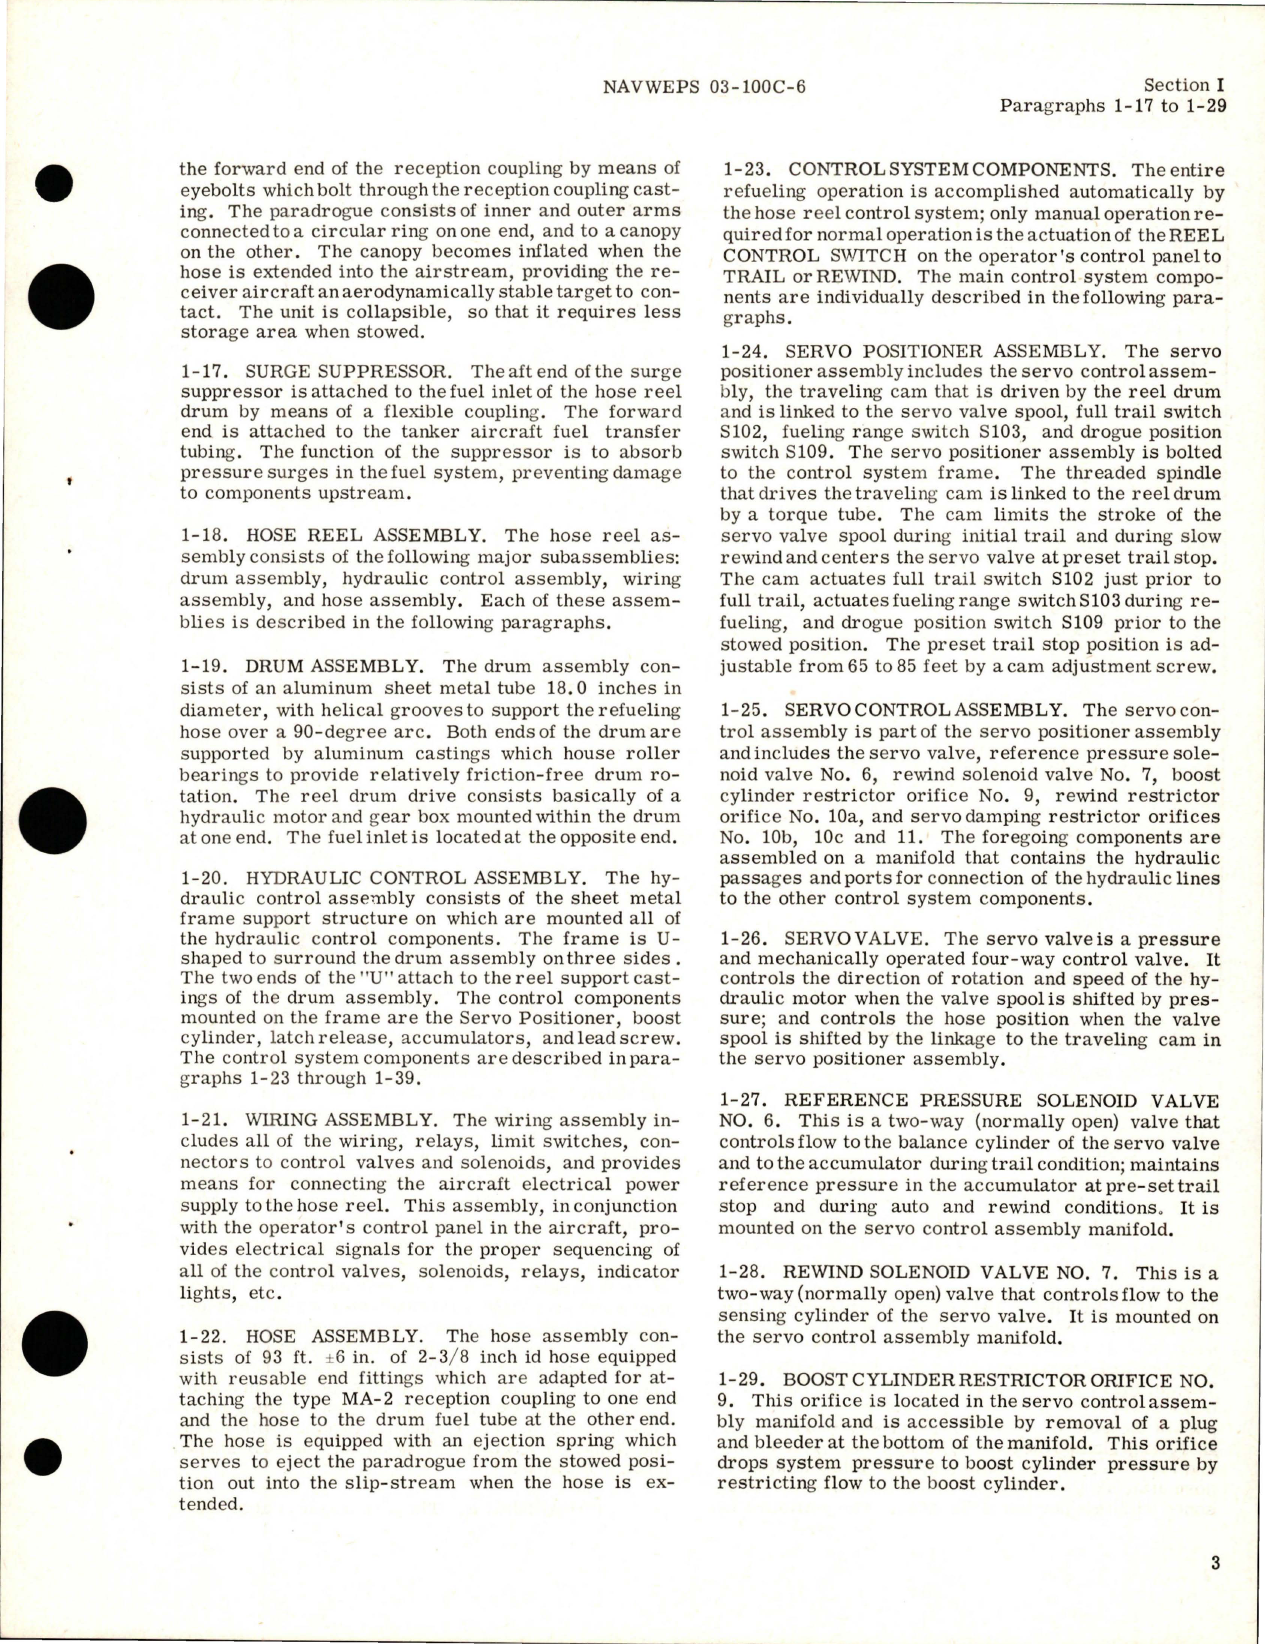 Sample page 7 from AirCorps Library document: Operation and Maintenance Instructions for Hose Reel Installation - Model FR300B - Part 149R1001-107 